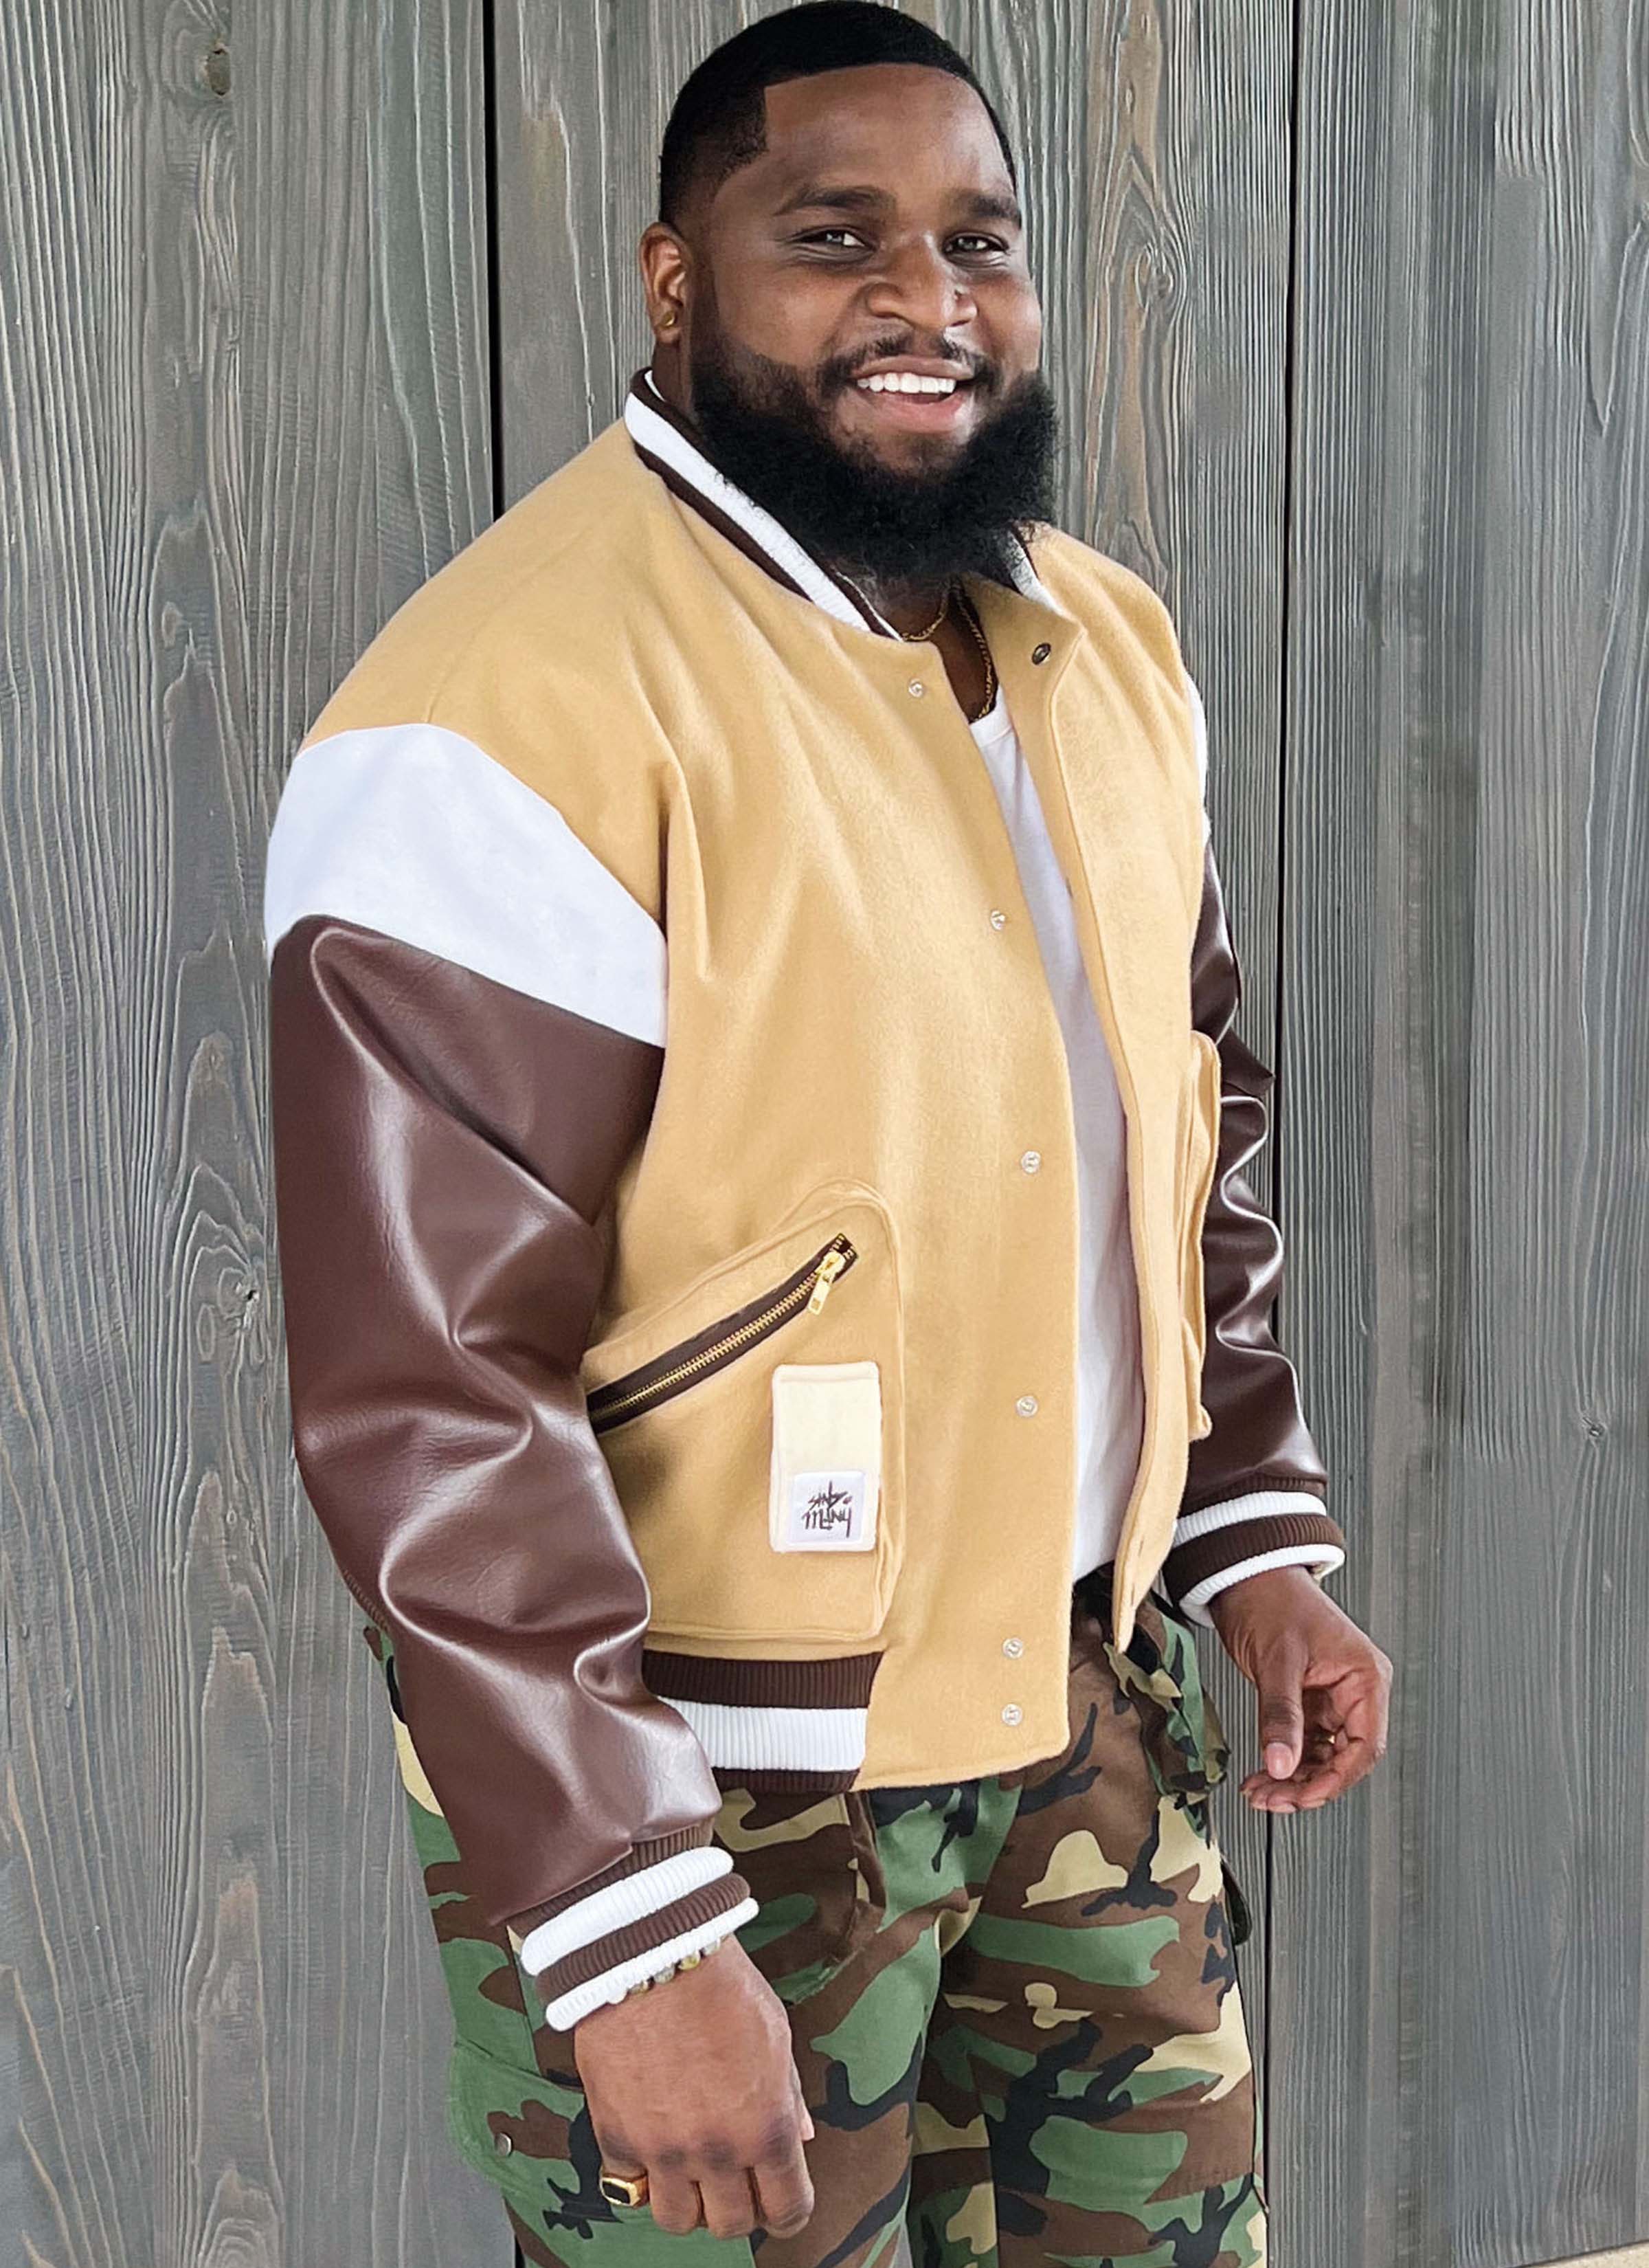 Know Me sewing pattern 2010 Men's Varsity Bomber Jacket by Sins of Many from Jaycotts Sewing Supplies